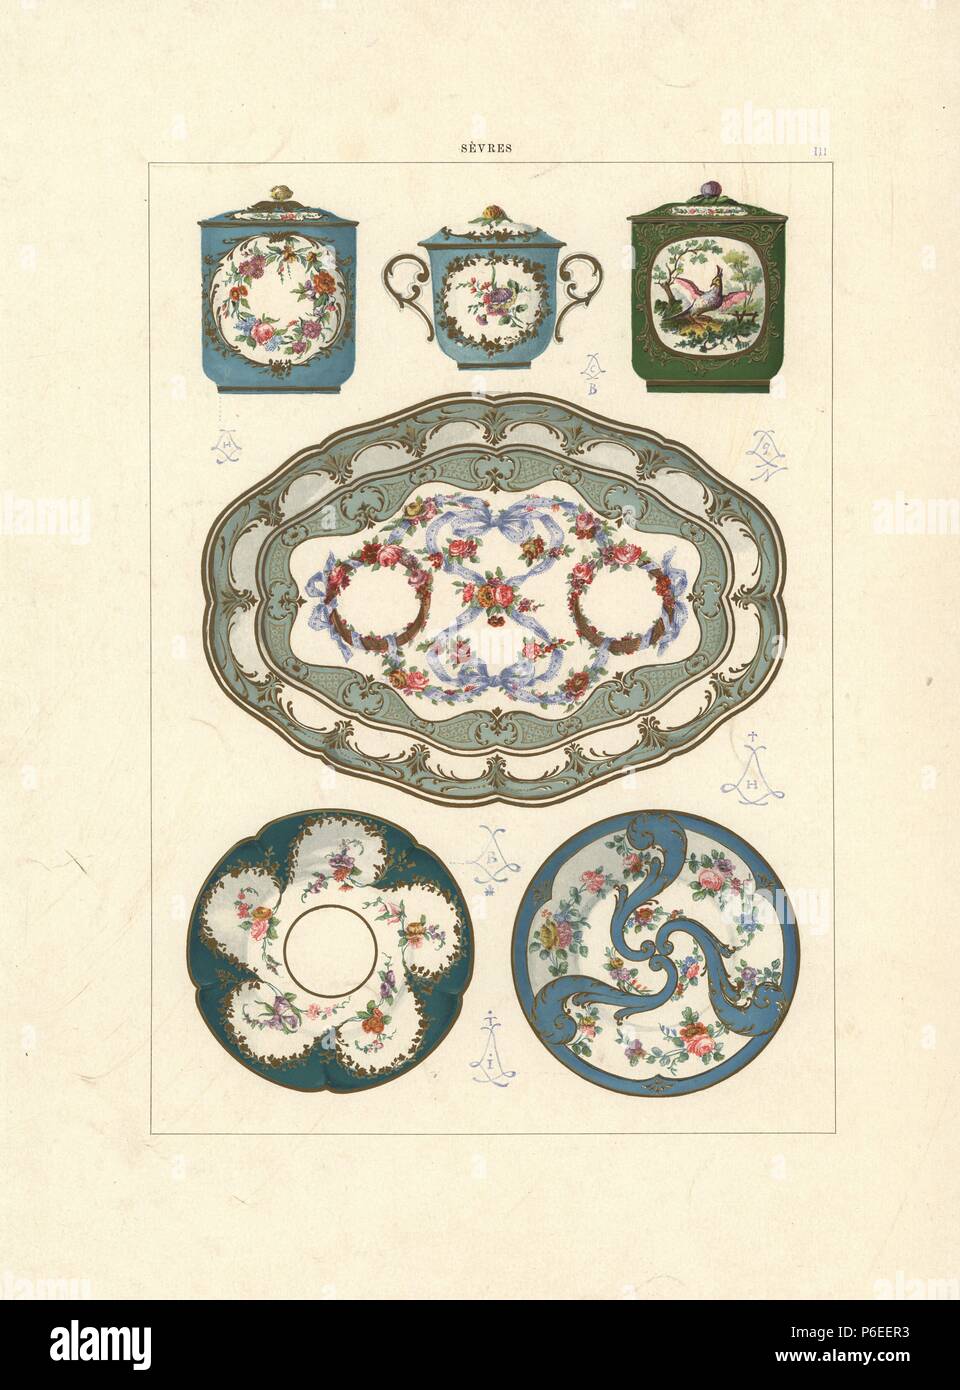 Fonds partiels (partial background) porcelain: cosmetic pot 1760, cream pot with flowers by Barre 1754, cosmetic pot decorated by Aloncle 1759, tete-a-tete plate by Binet 1760, saucer with flowers by Taillander 1754, and saucer decorated by Binet 1761. Chromolithograph by Gillot of an illustration by Edouard Garnier from The Soft Paste Porcelain of Sevres, Maison Quantin, Paris, 1891. Stock Photo